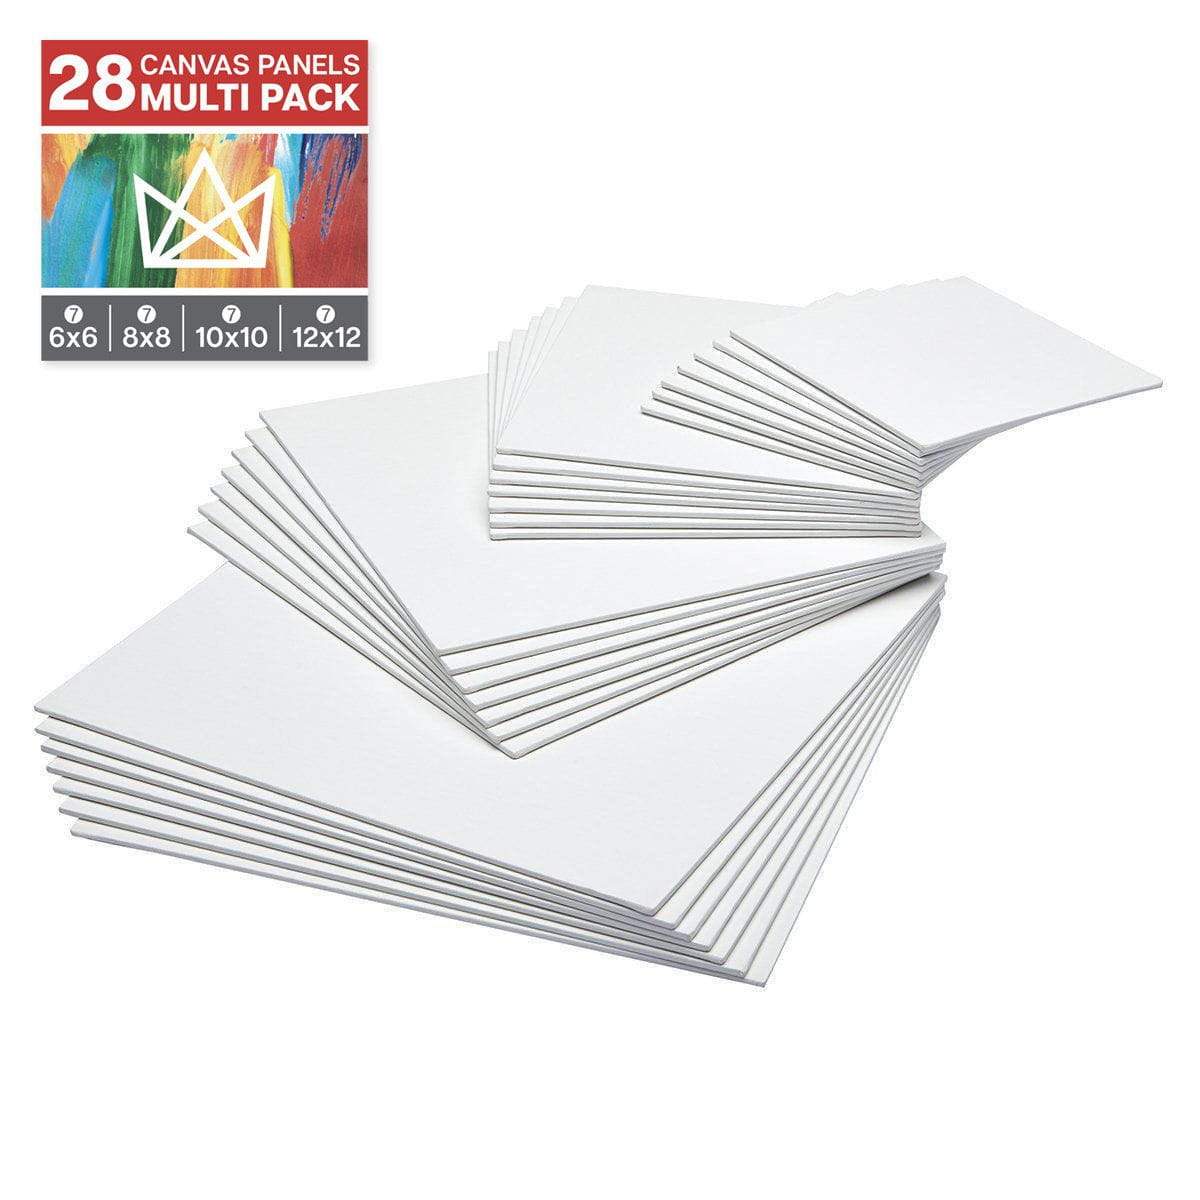  U.S. Art Supply Multi-Pack 6-Ea of 5 x 5, 8 x 8, 10 x 10, 12 x  12 inch. Professional Quality Square Artist Canvas Panel Board Assortment  Pack (24 Total Panel Boards)